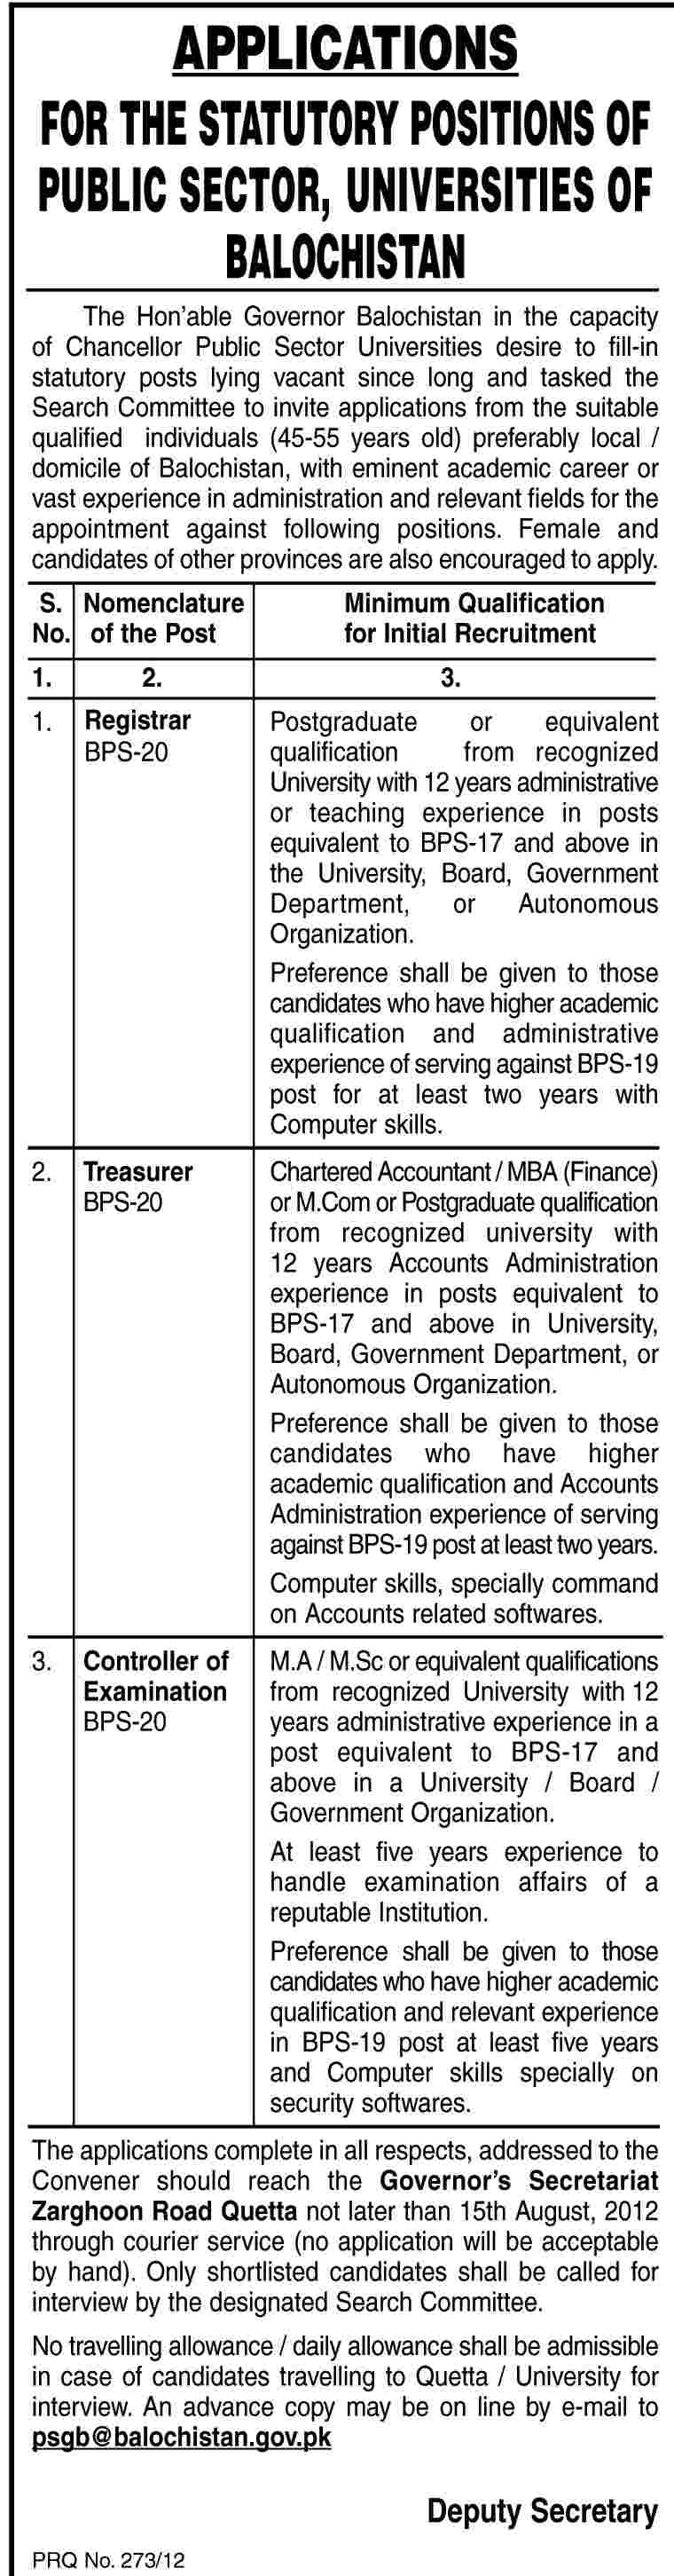 Non-Teaching Faculty Required for The Public Sector Universities of Balochistan (Government Job)